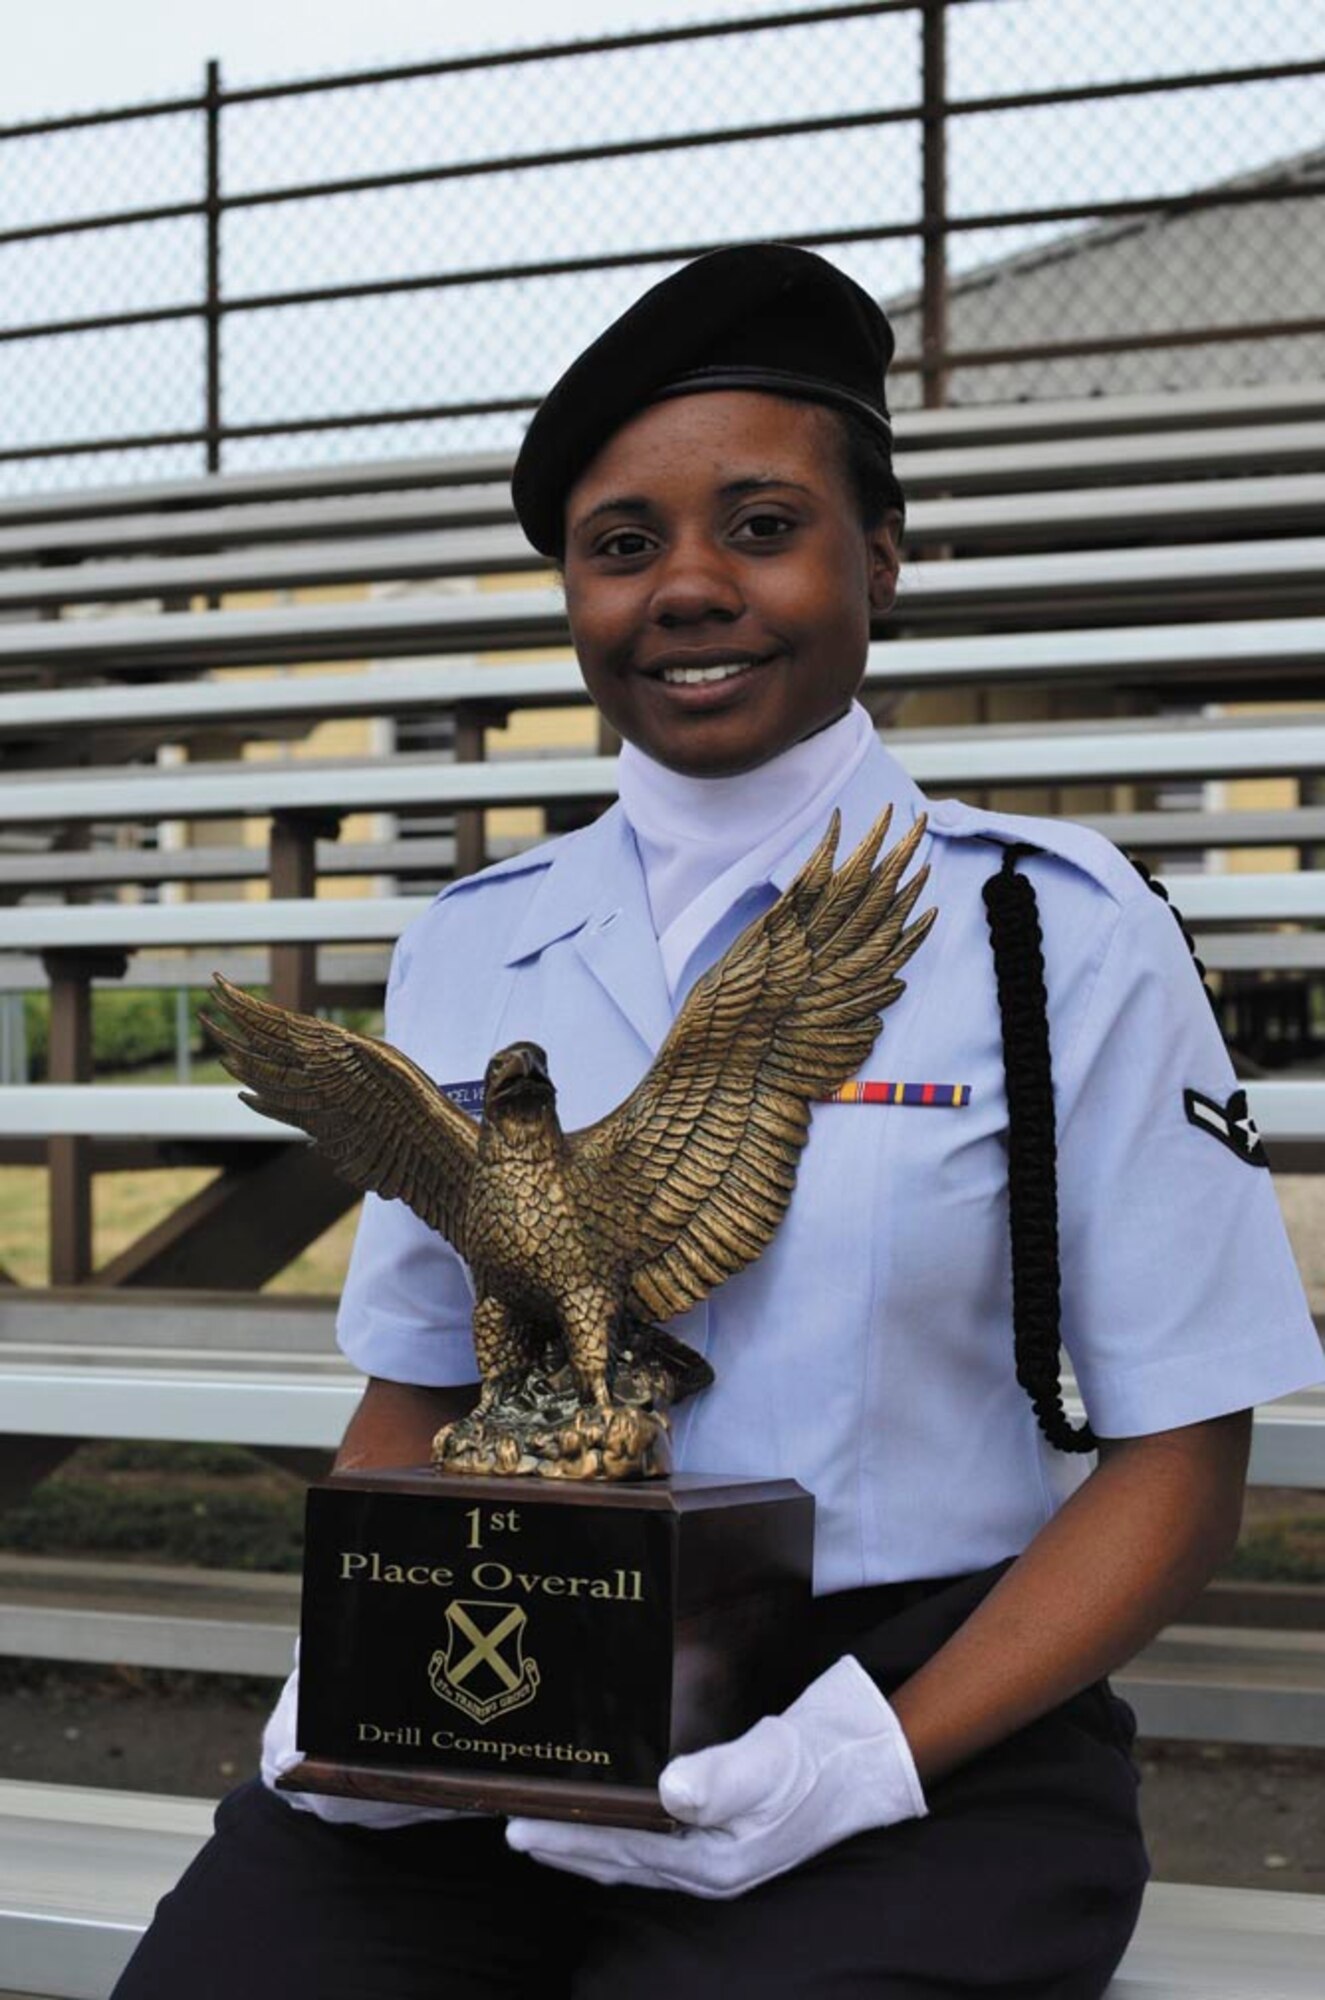 Airman Shakira McElveen, team drill commander, shows off the overall first place trophy won by the 343rd Training Squadron at the 37th Training Group quarterly drill competition, JBSA-Lackland. (U.S. Air Force photo by Airman Peter McNair/Released)